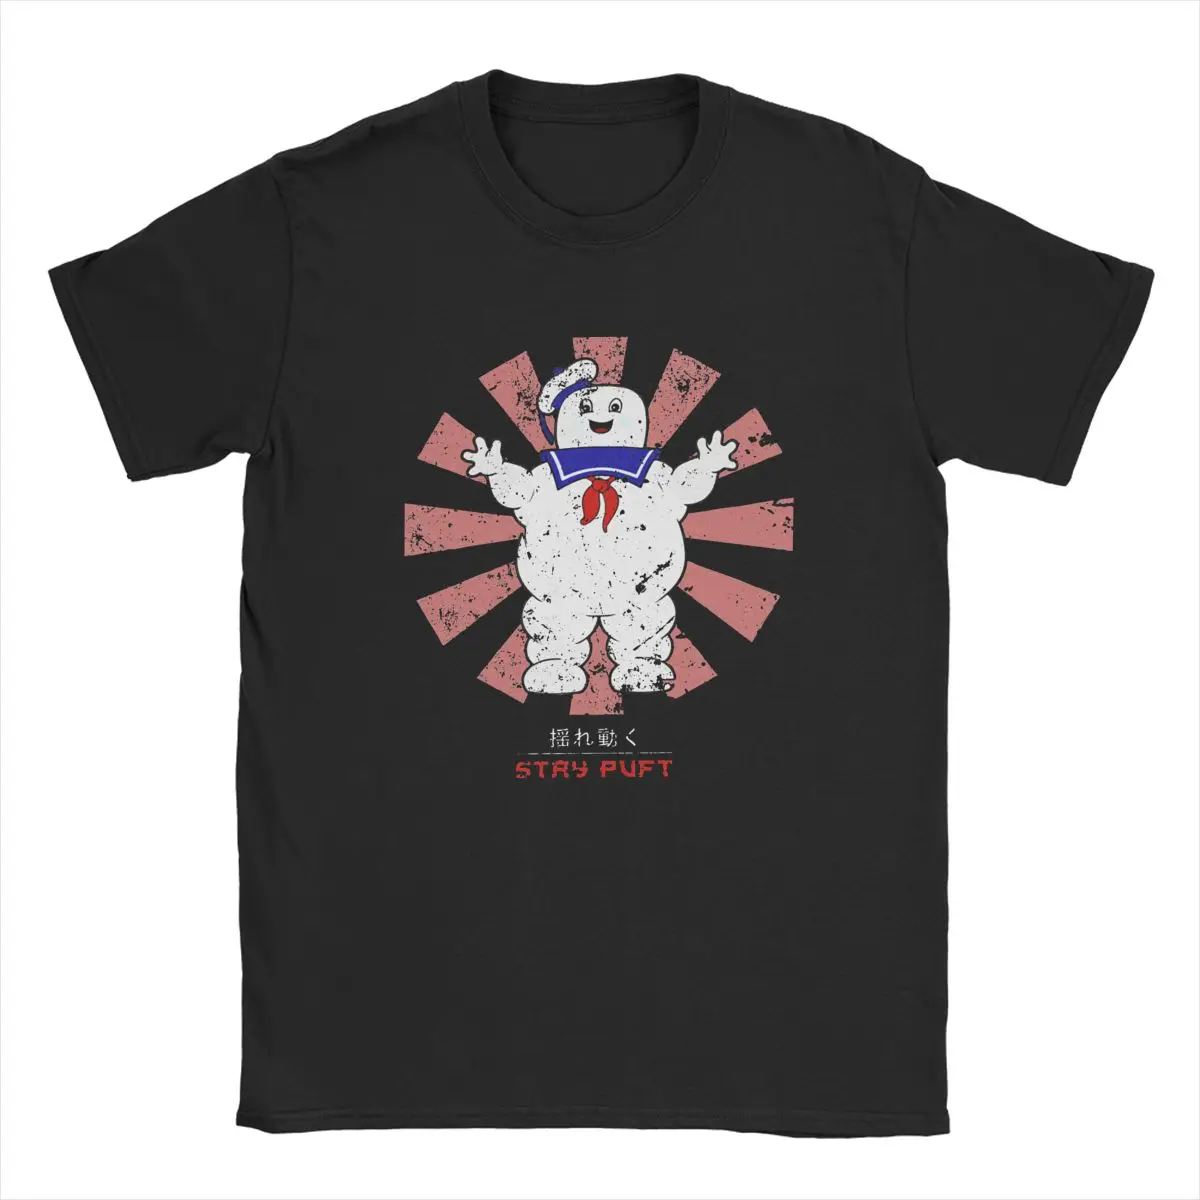 

Men Women's T-Shirt Stay Puft Retro Japanese Ghostbusters Marshmallows Movie Casual Cotton Tees T Shirt Round Neck Clothing Gift